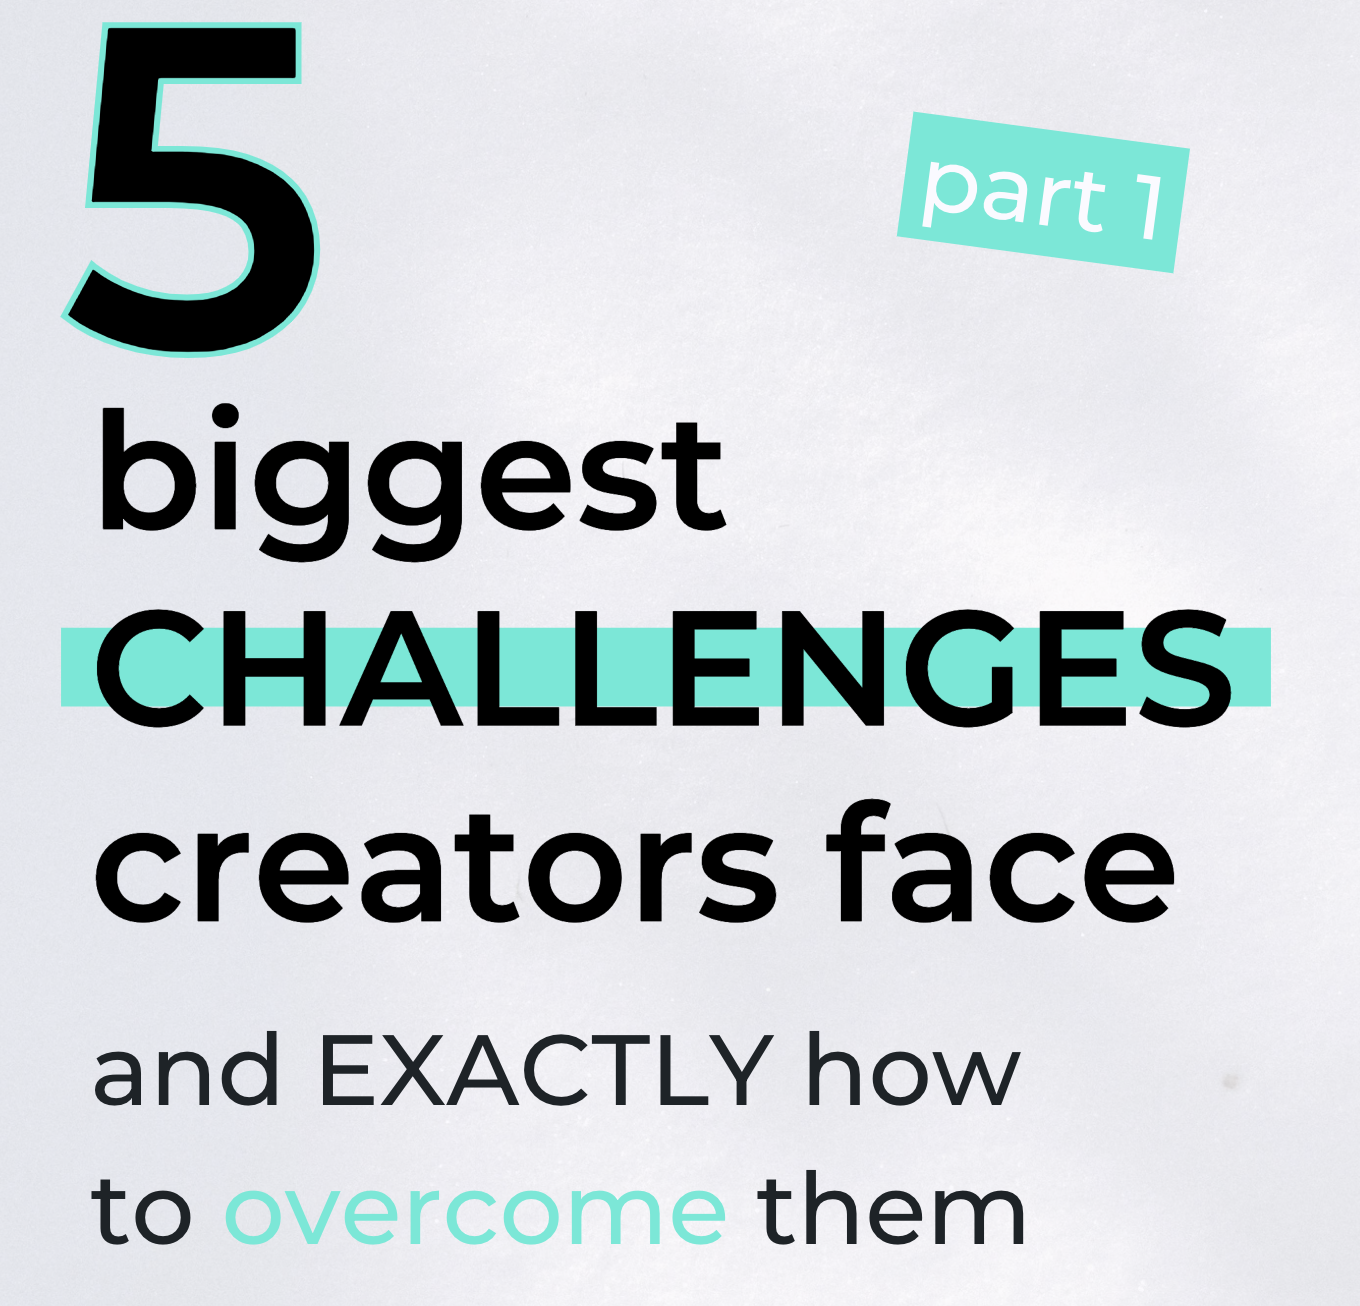 Text: 5 Biggest Challenges creators face and exactly how to overcome them